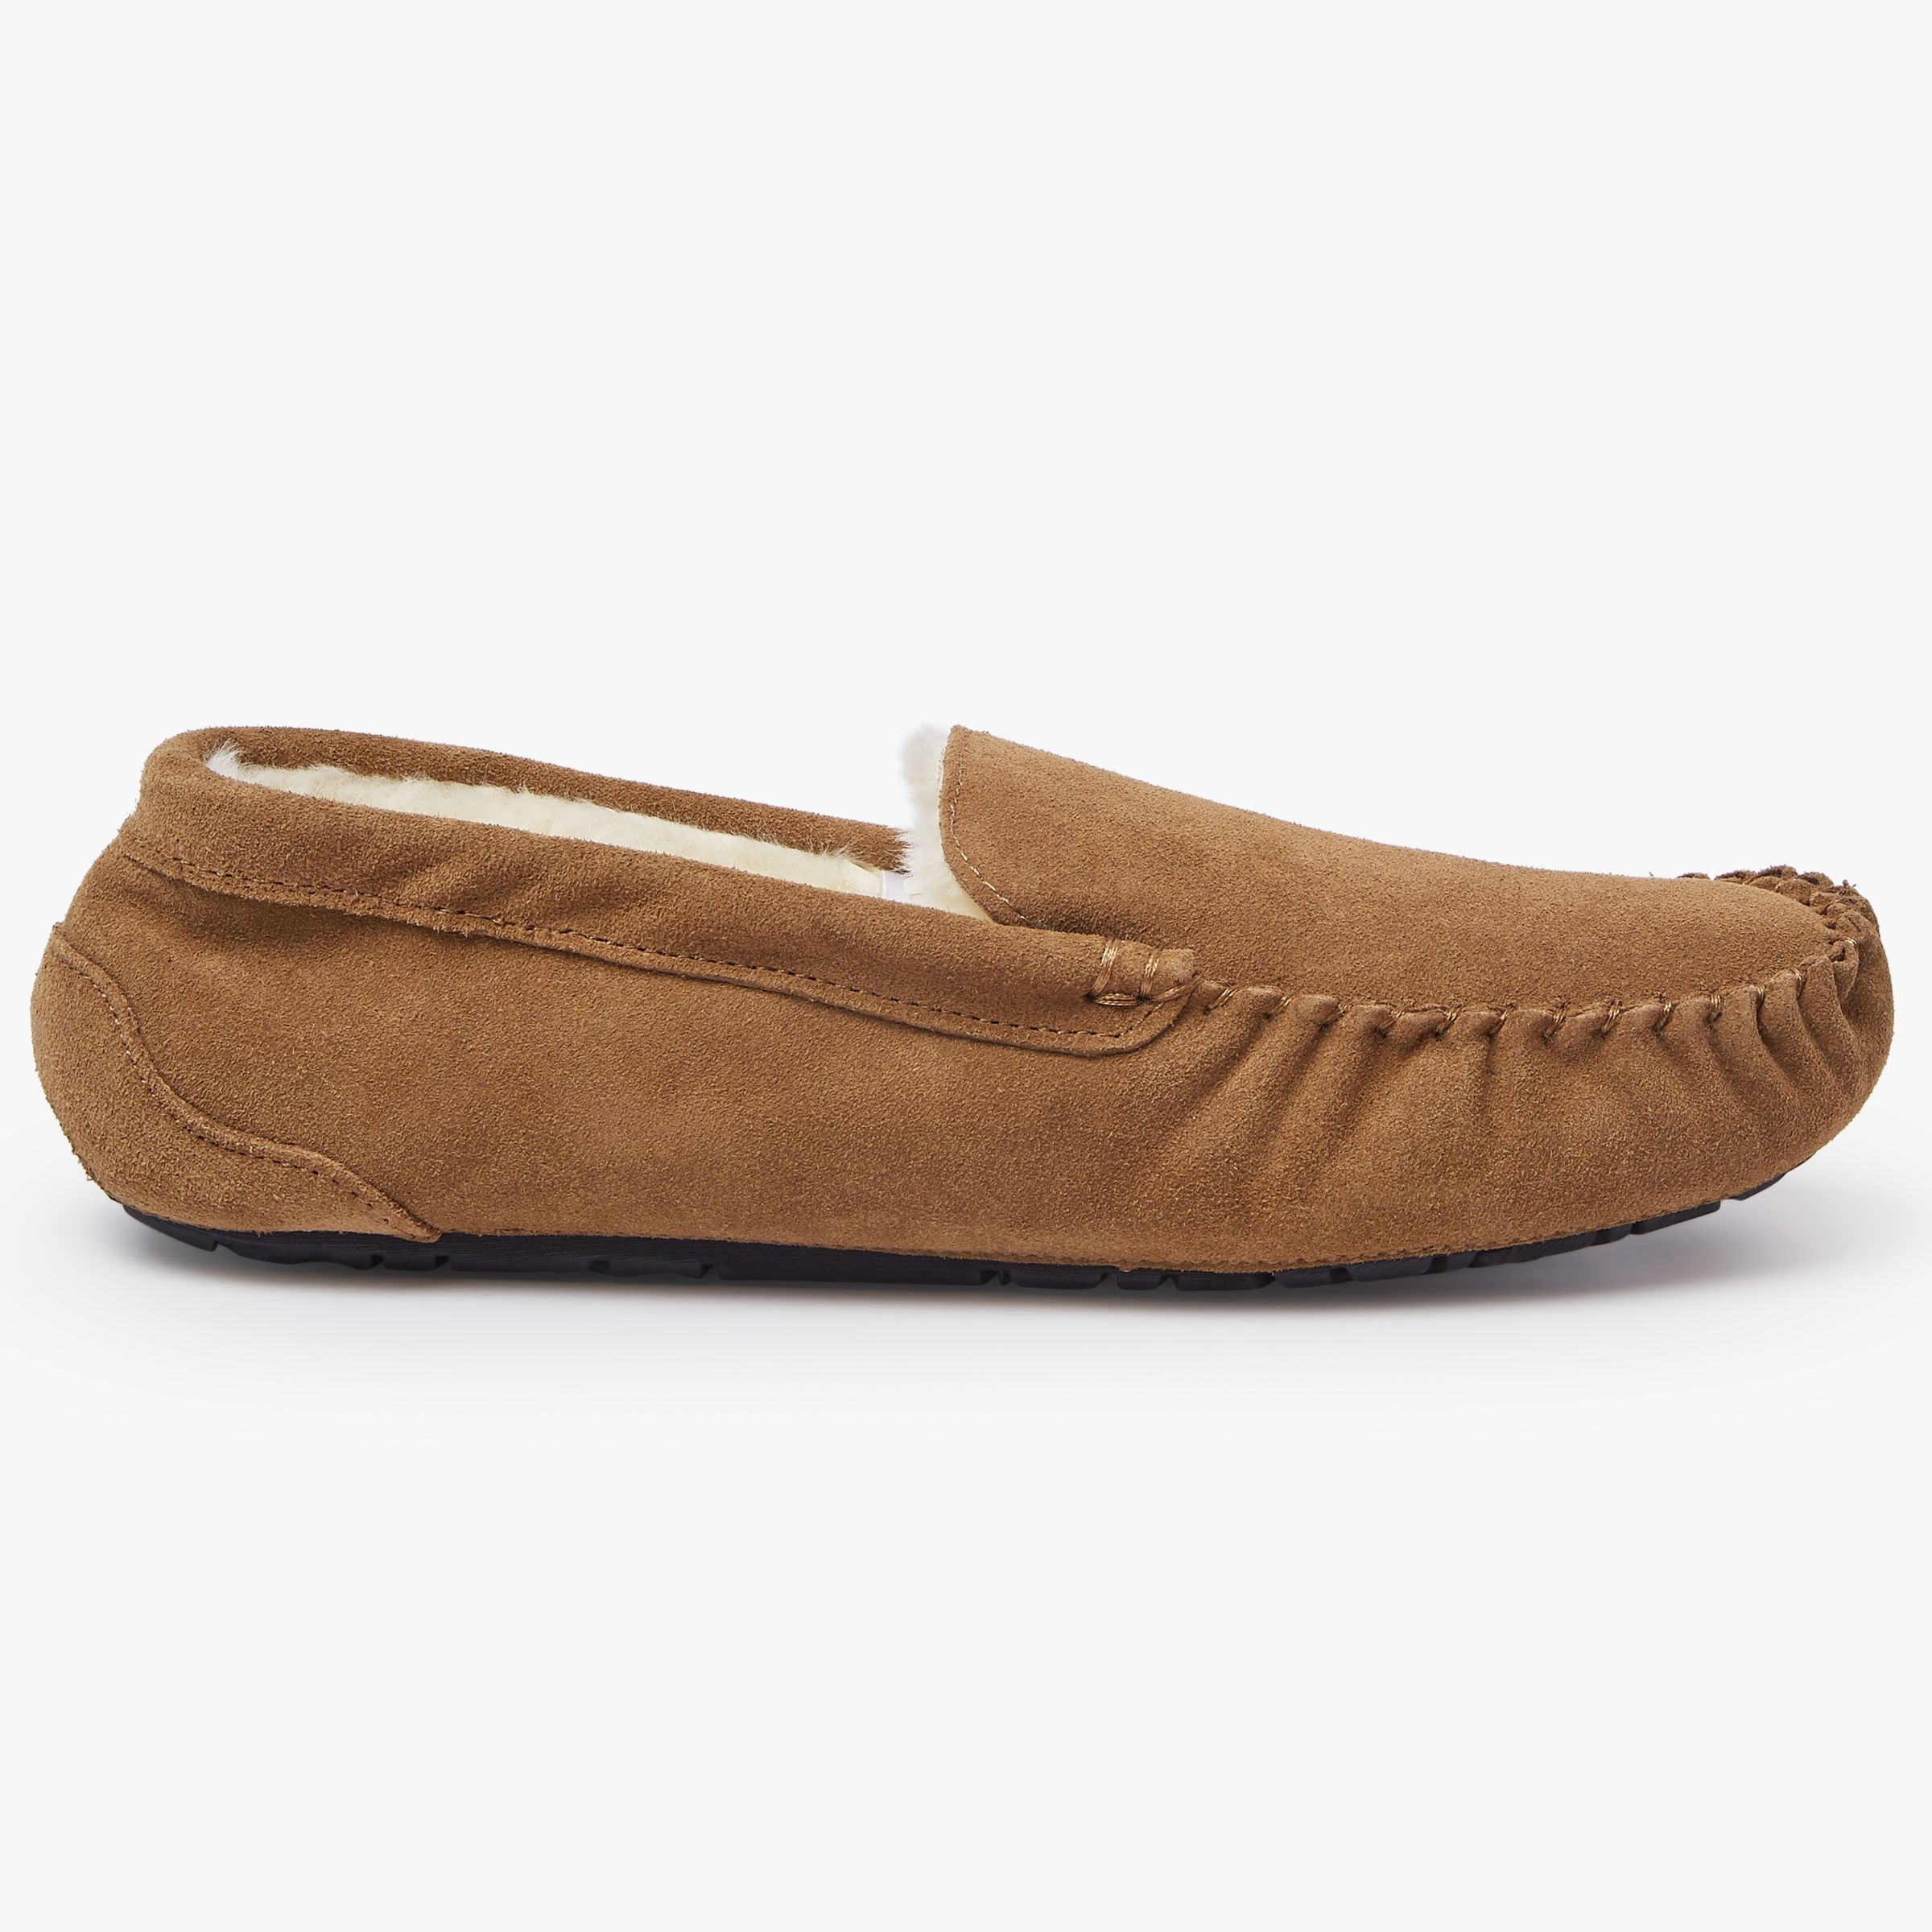 John Lewis & Partners Moccasin Faux Fur Lined Slippers